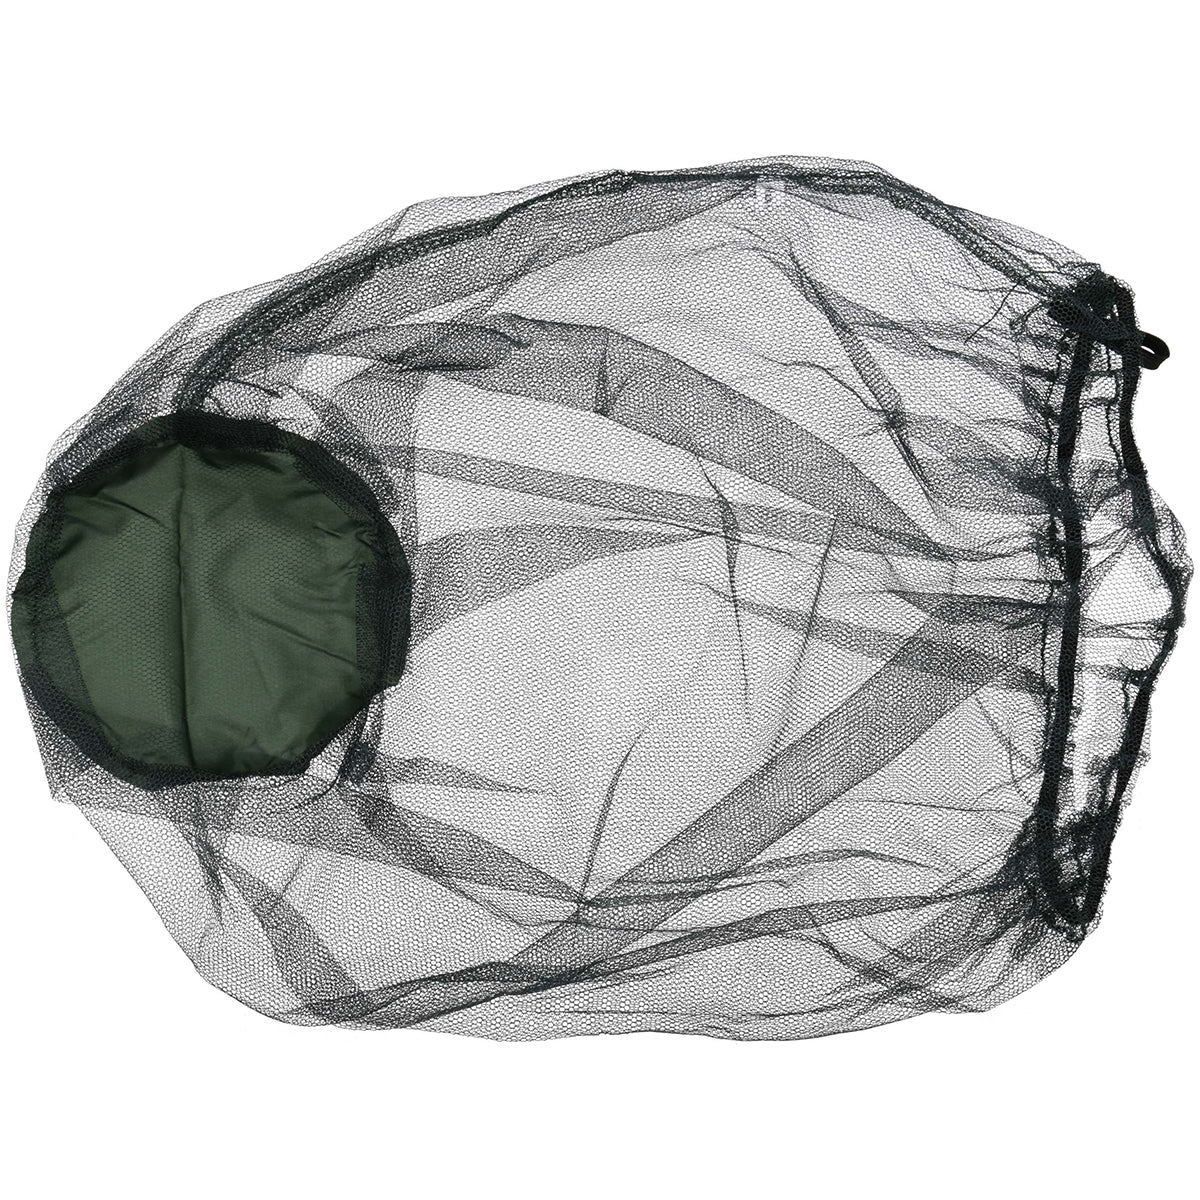 Coghlan's Mosquito Head Net, Mesh Stops Flying Insects, Outdoor Camping Survival Coghlan's